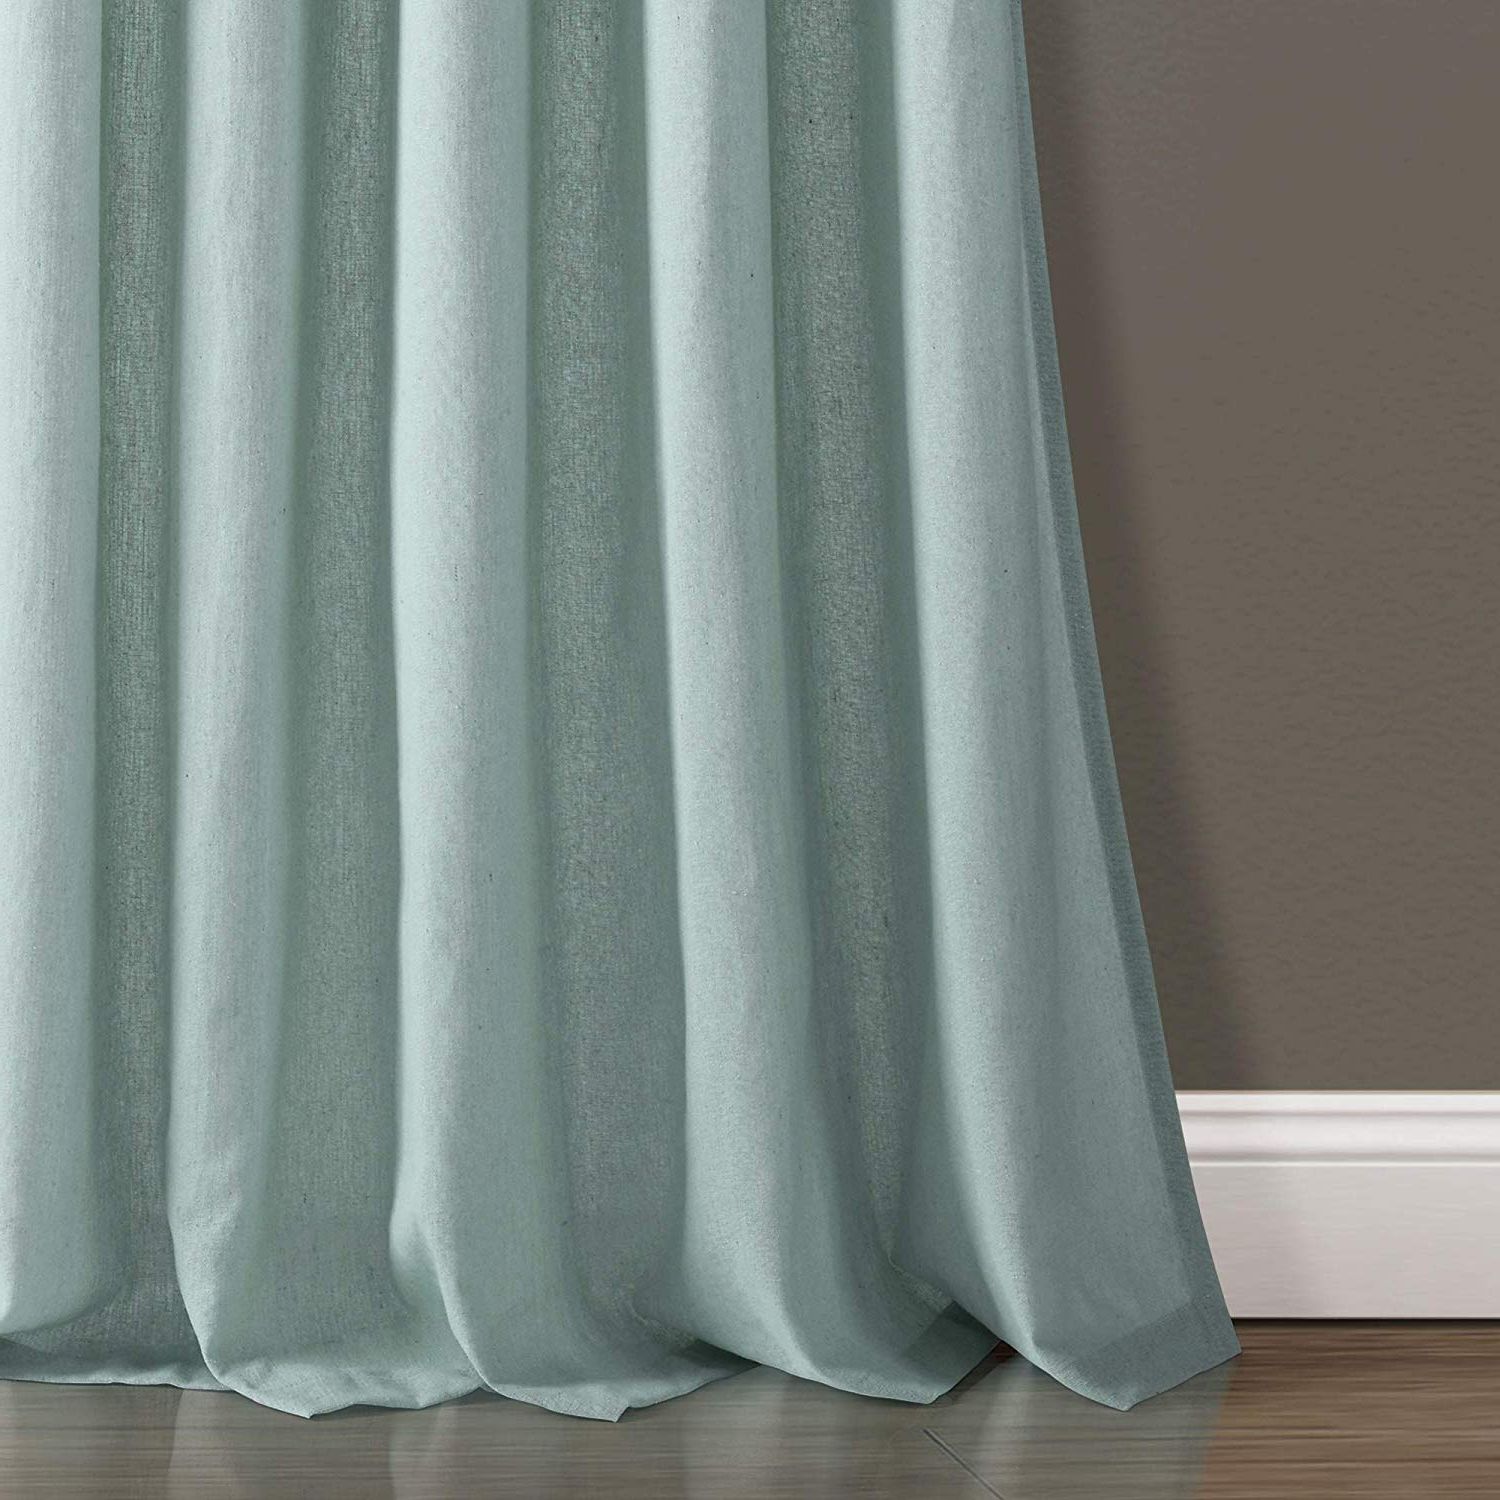 Knotted Tab Top Window Curtain Panel Pairs Throughout Well Liked Lush Decor Burlap Knotted Tab Top Window Curtain Panel Pair, 95" X 45", Blue (View 18 of 20)